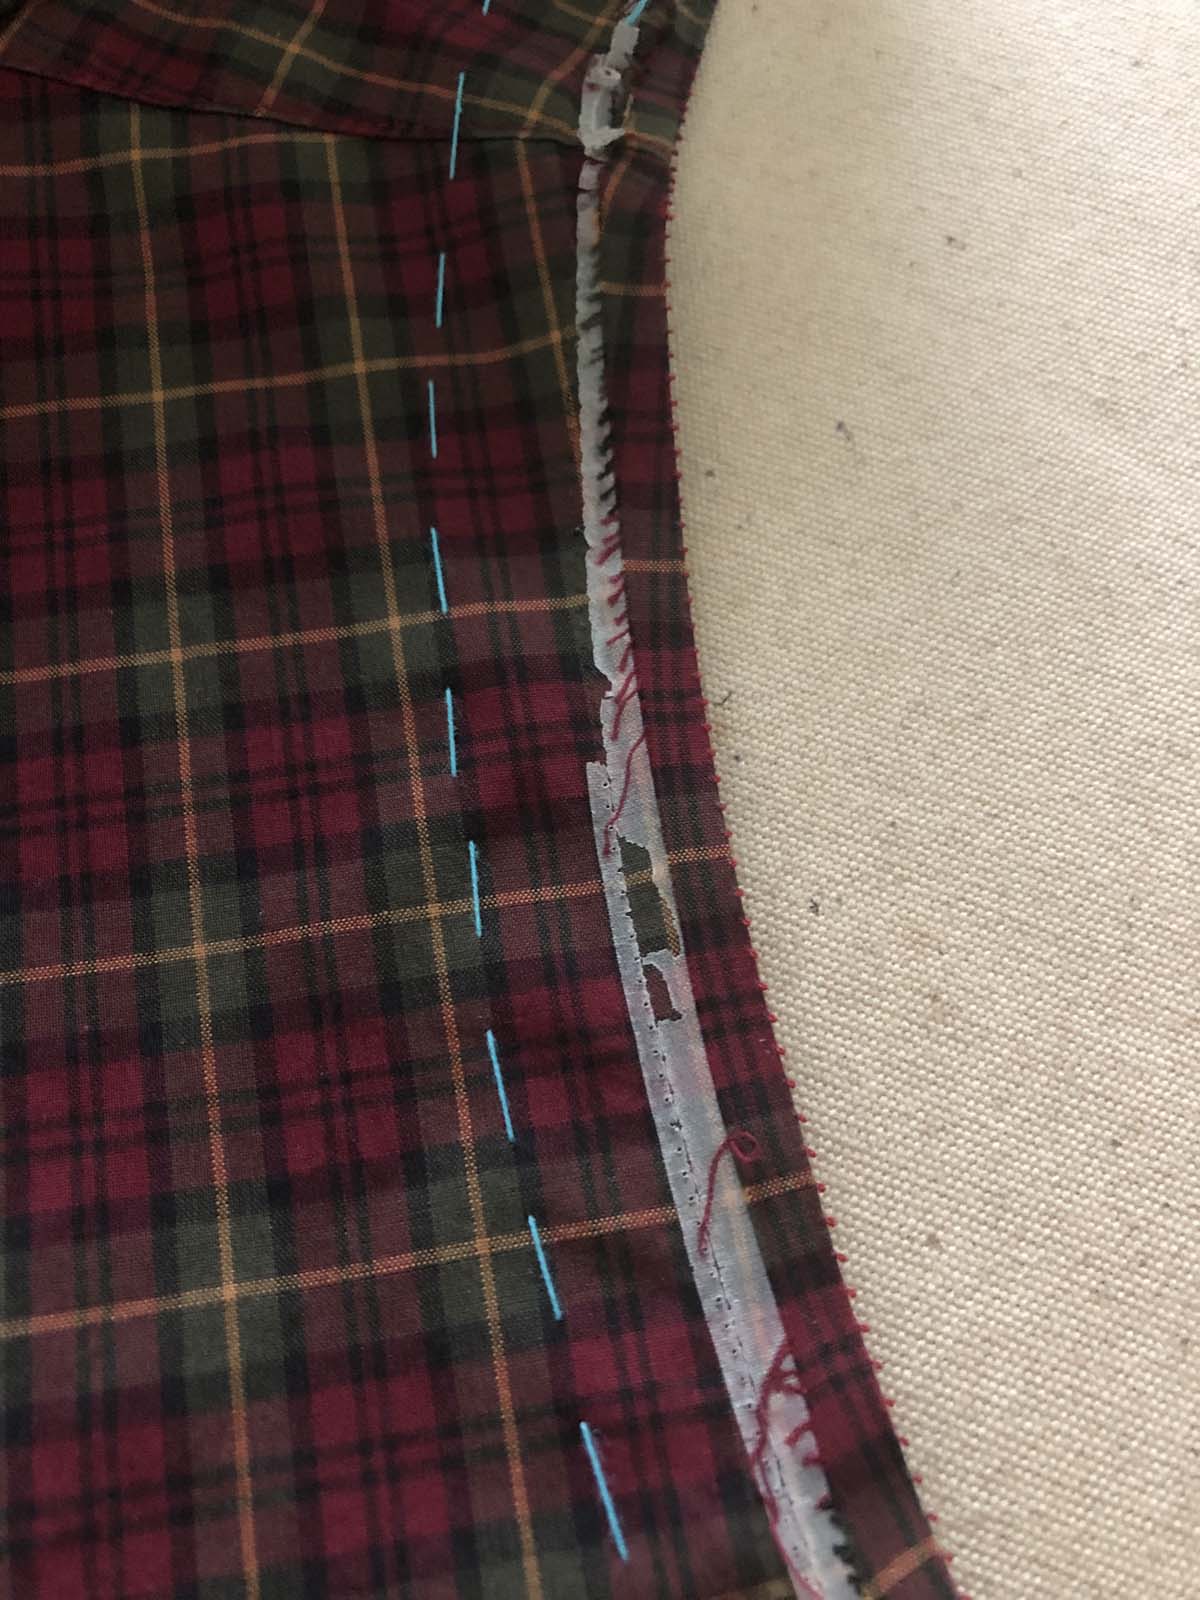 Manufacturer used basting tape to match the plaids